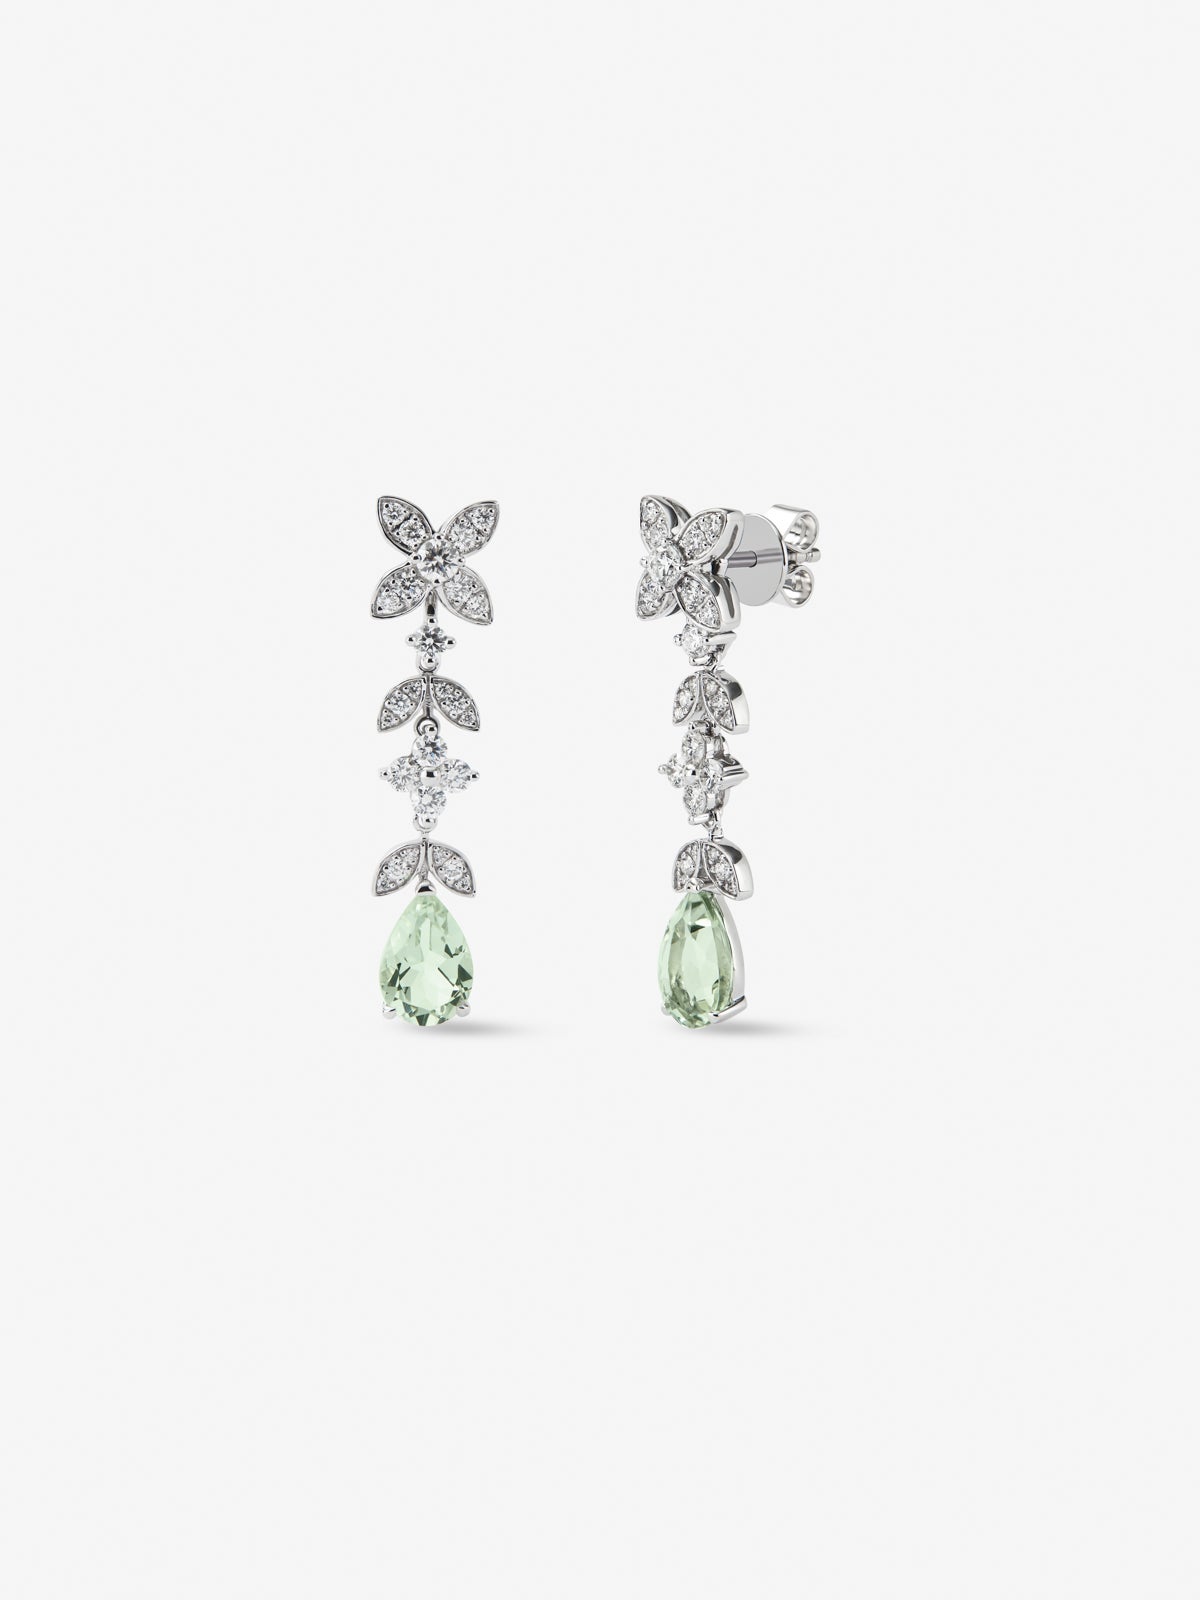 18K white gold earrings with 52 brilliant-cut diamonds with a total of 0.95 cts and pear-cut green amethysts